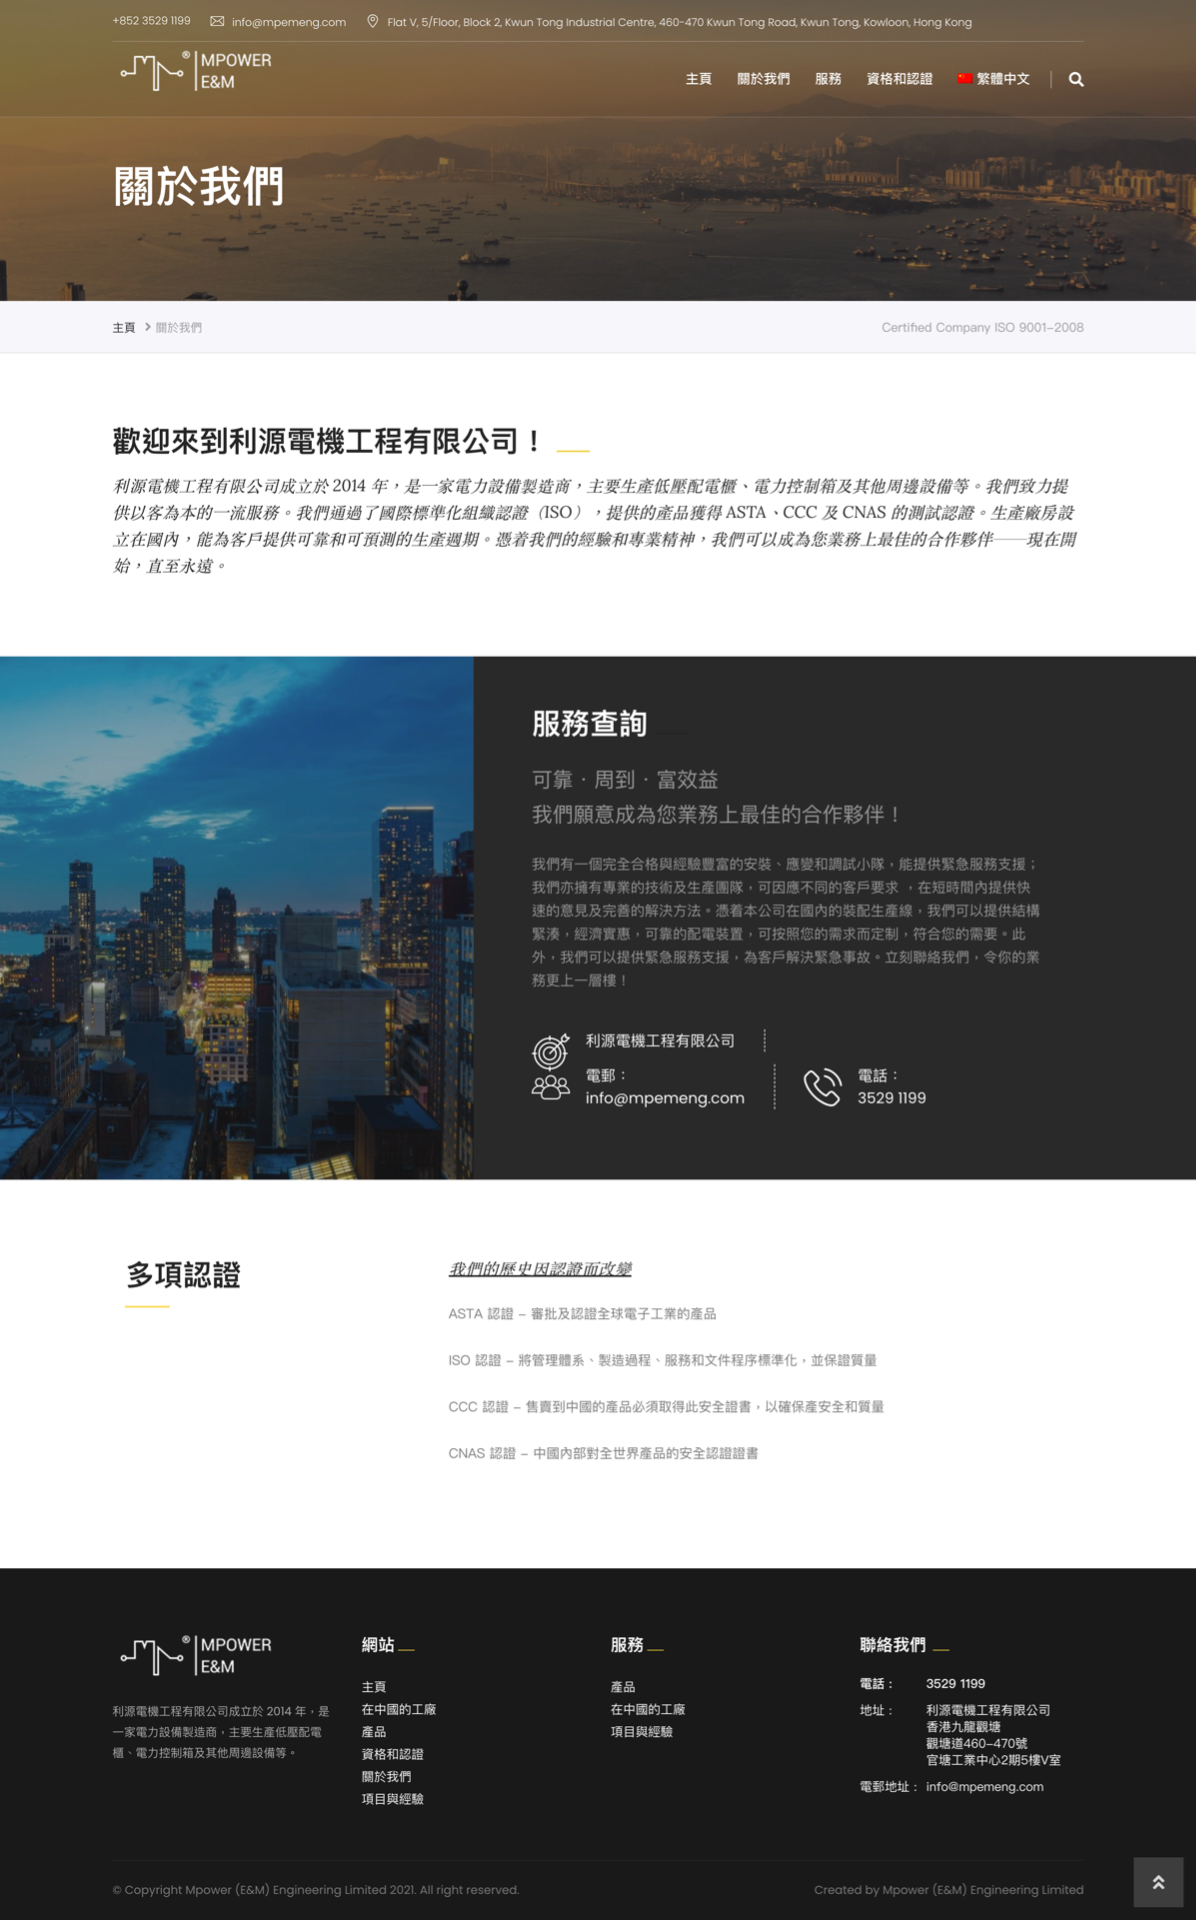 Website Content - MPOWER (CHI)
(Website not published yet)
- Write Business Enquiry (Chinese and English)
- Edit wordings on all other pages (content provided by the client)